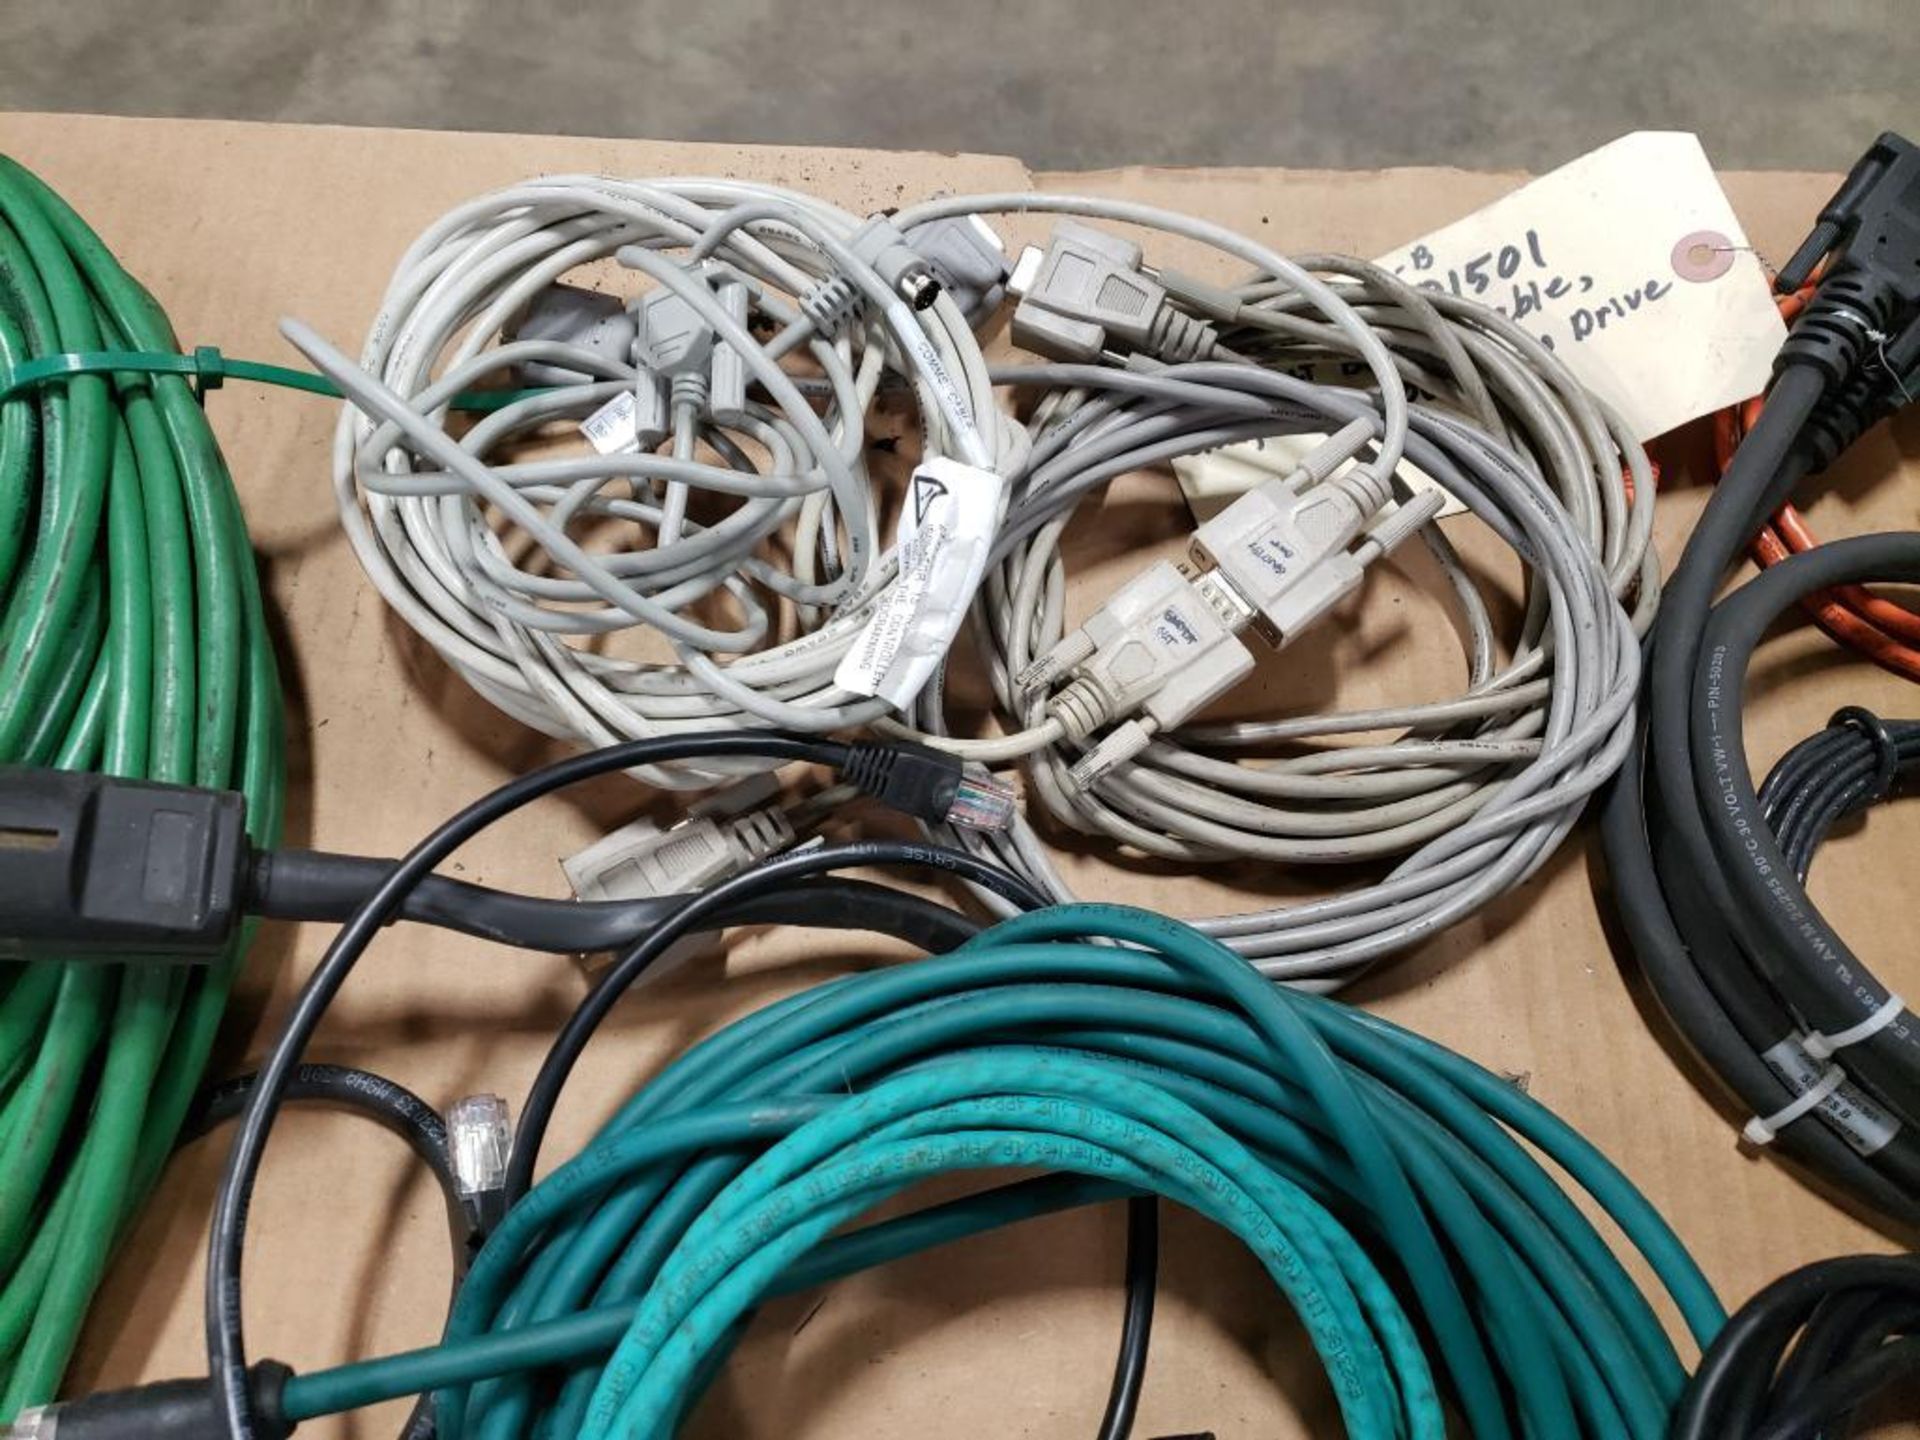 Pallet of assorted electrical connection wires. - Image 6 of 13